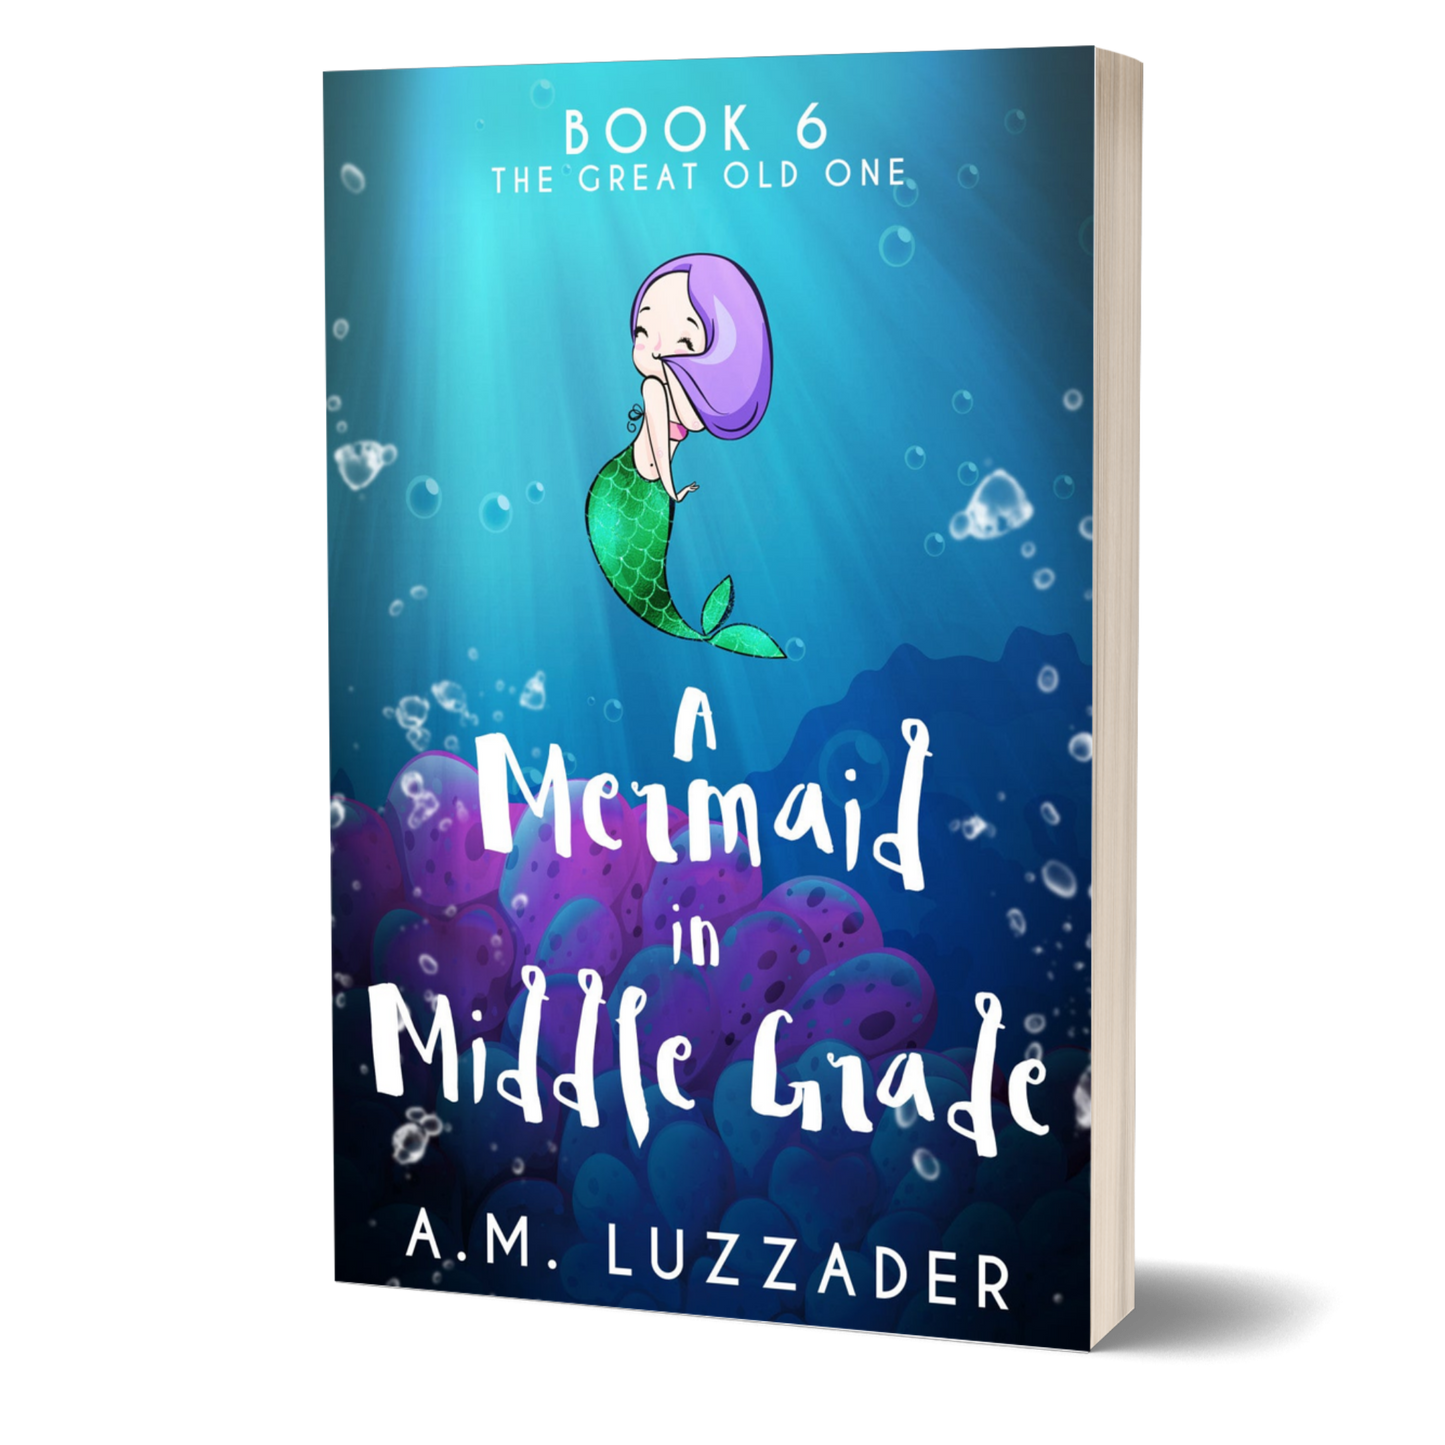 A Mermaid in Middle Grade Book 6: The Great Old One